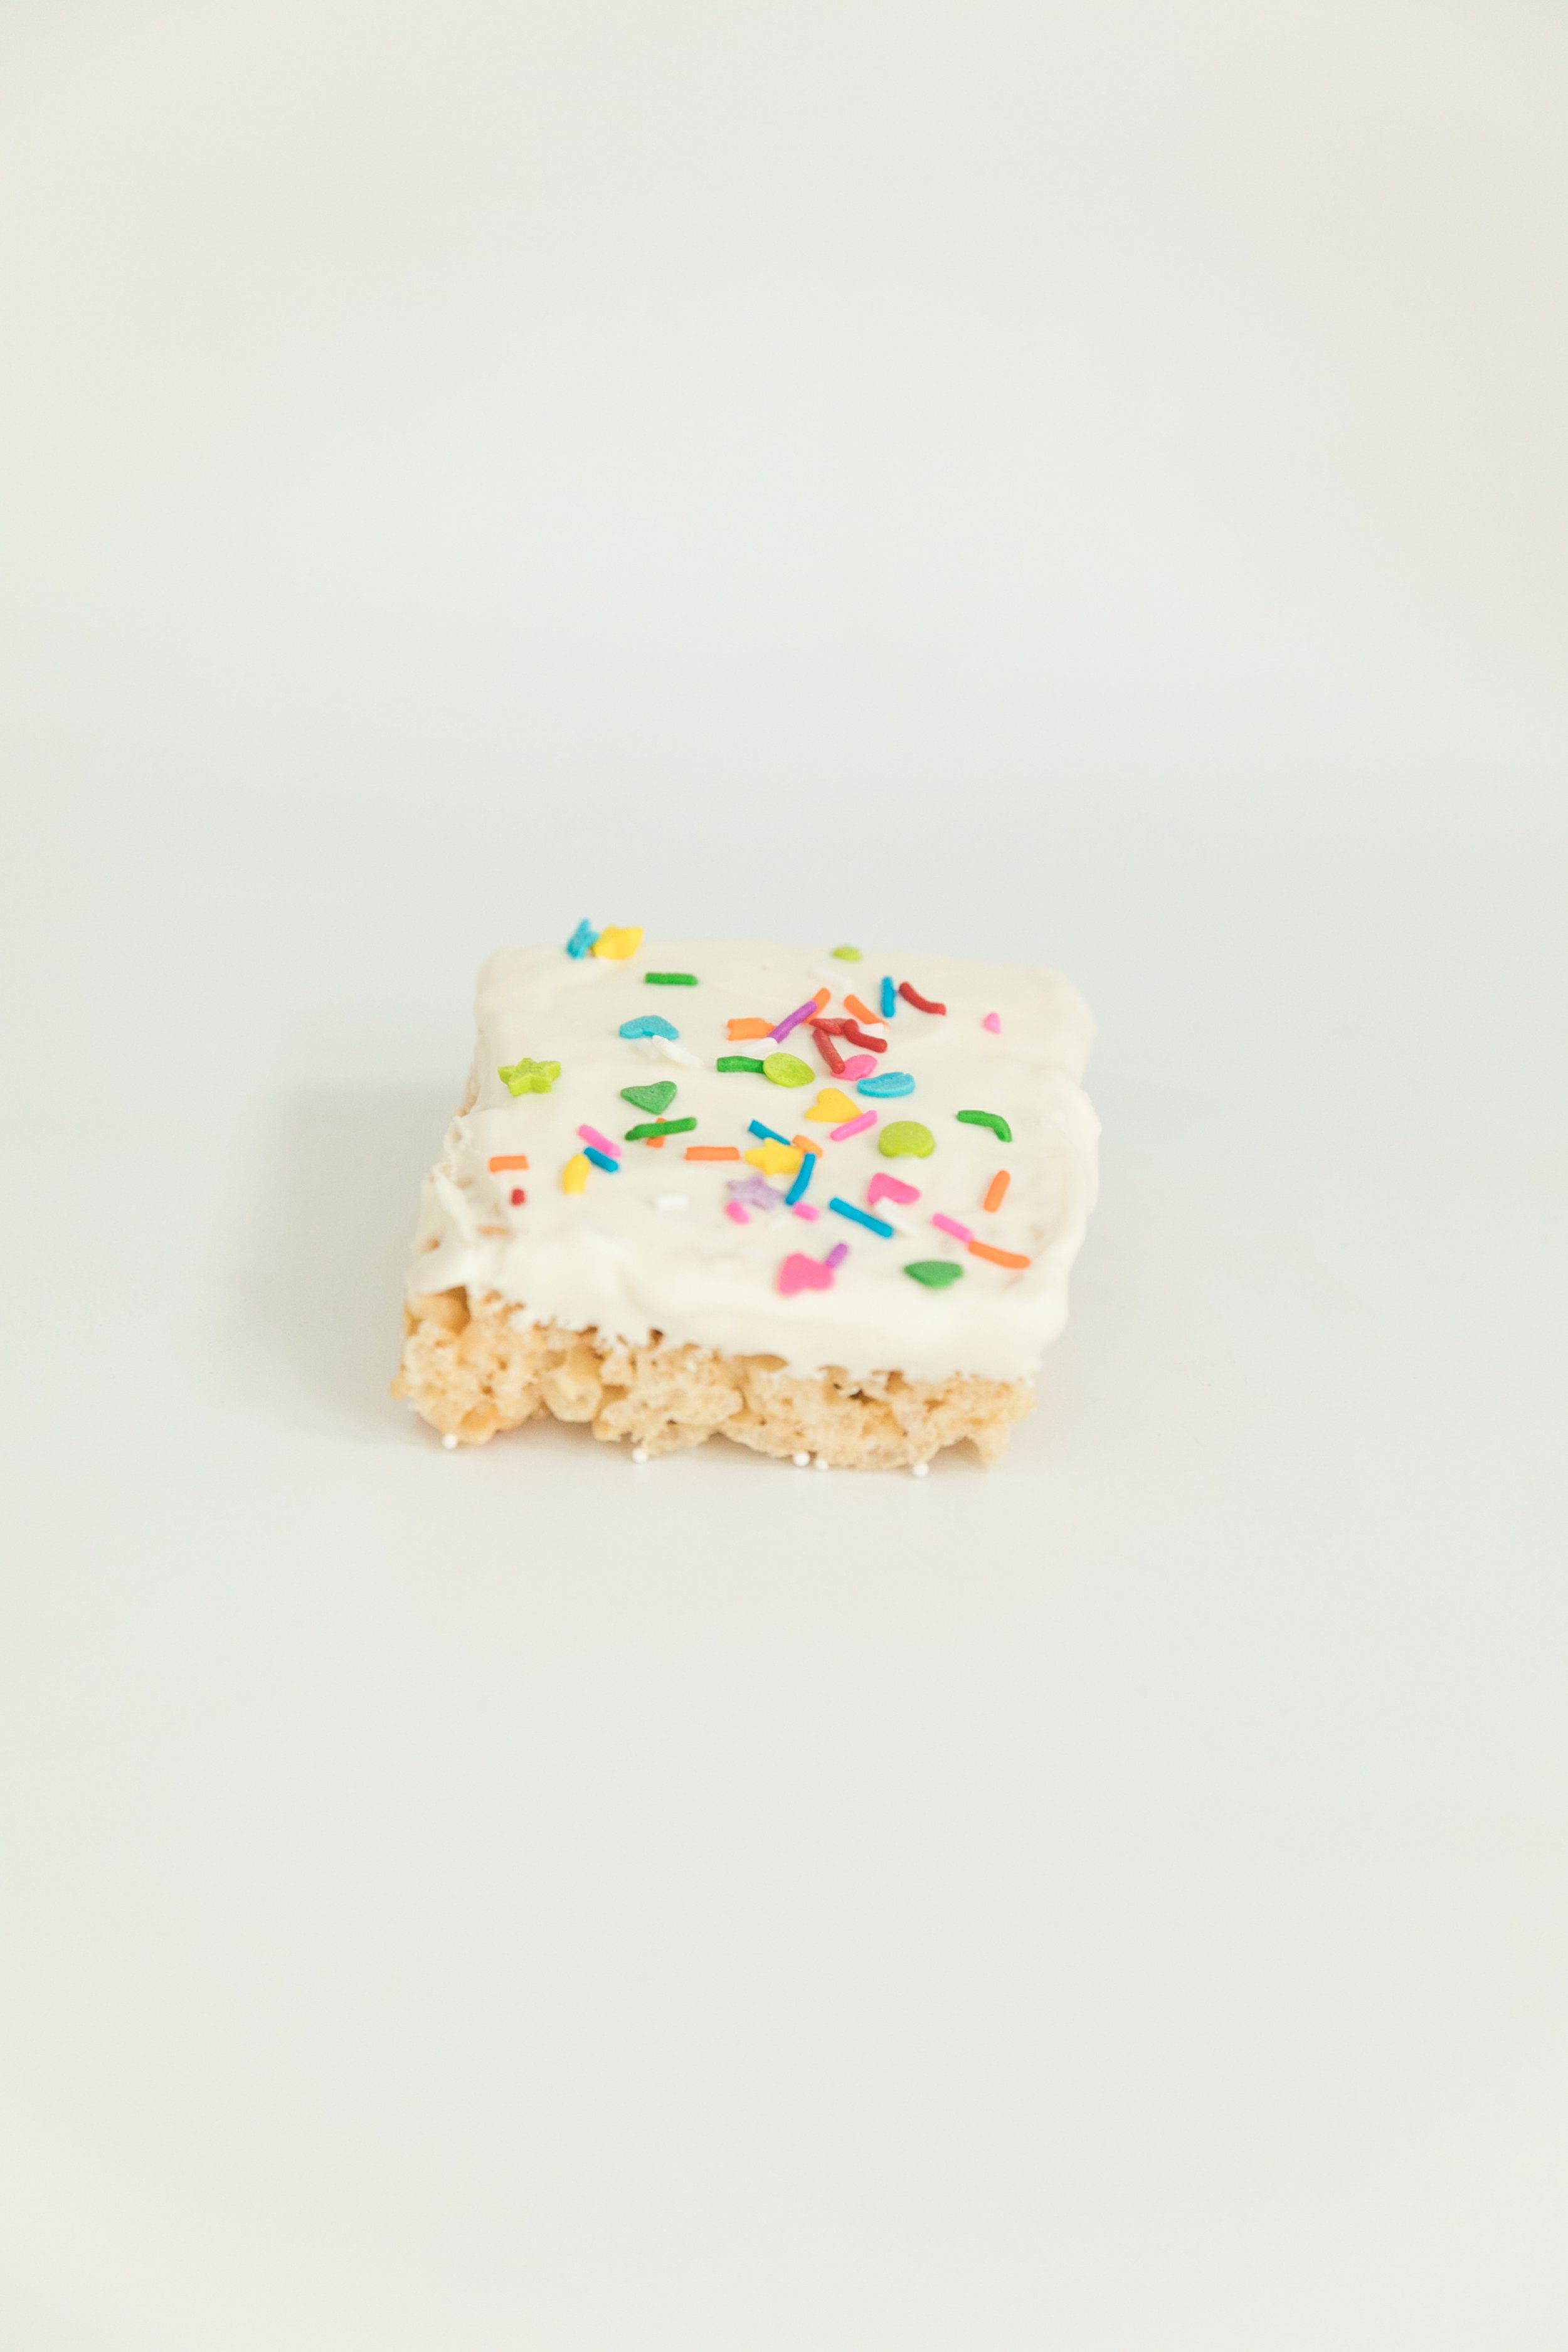  rice krispies treat dipped in white chocolate covered with sprinkles  